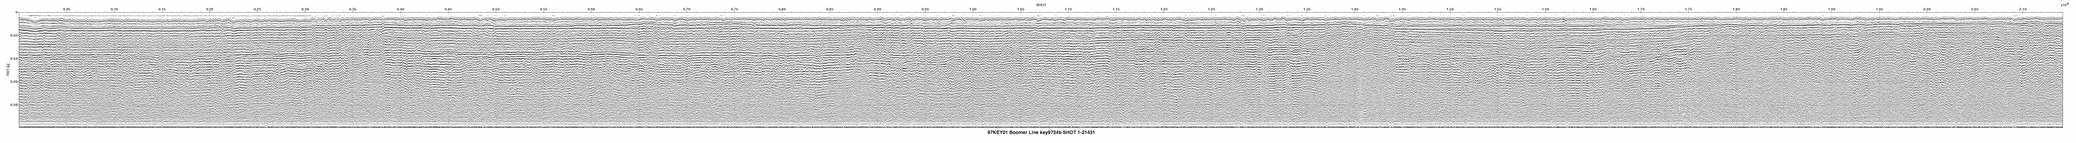 Thumbnail GIF image of the seismic trackline key9724b, with a hotlink to the more detailed, larger JPG image.